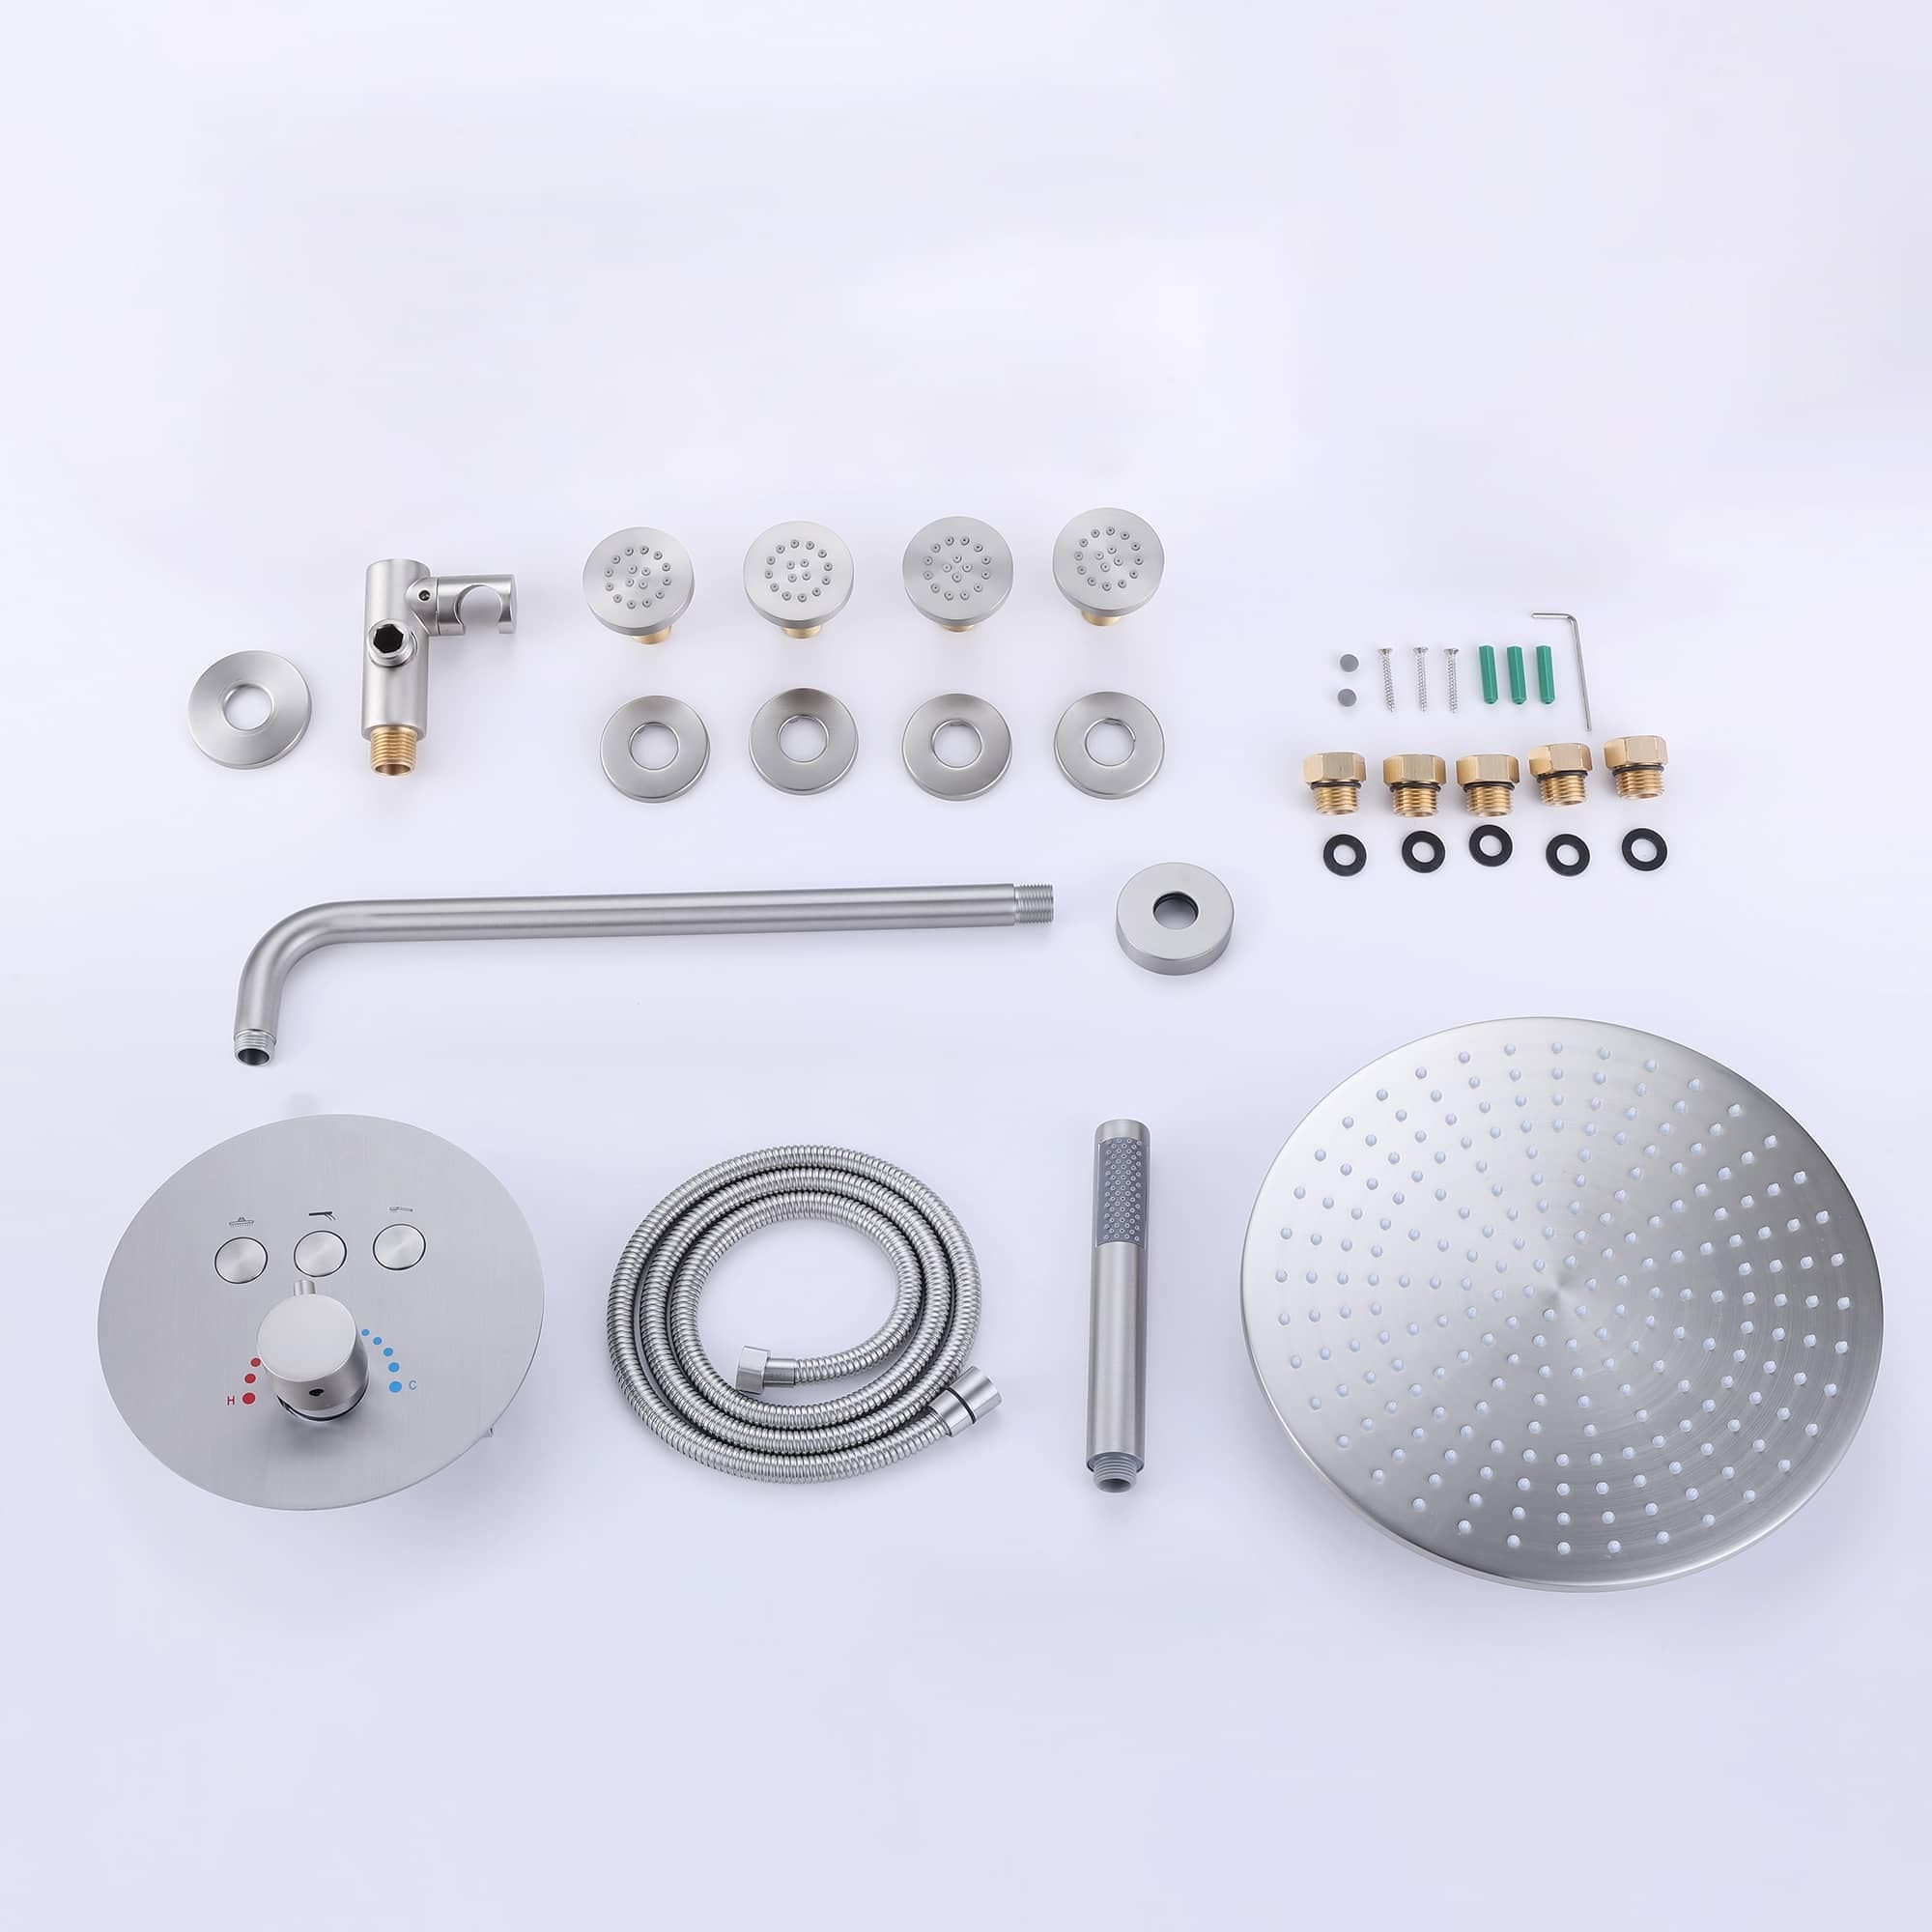 https://ak1.ostkcdn.com/images/products/is/images/direct/ded222e2cfc285aa92b162c6decabc1a86094e4b/Thermostatic-Shower-System-With-Rough-in-Valve-Wall-Mount-Shower-Faucet-With-Body-Jet-And-Hand-Shower-12-Inch-Shower-Head-Set.jpg